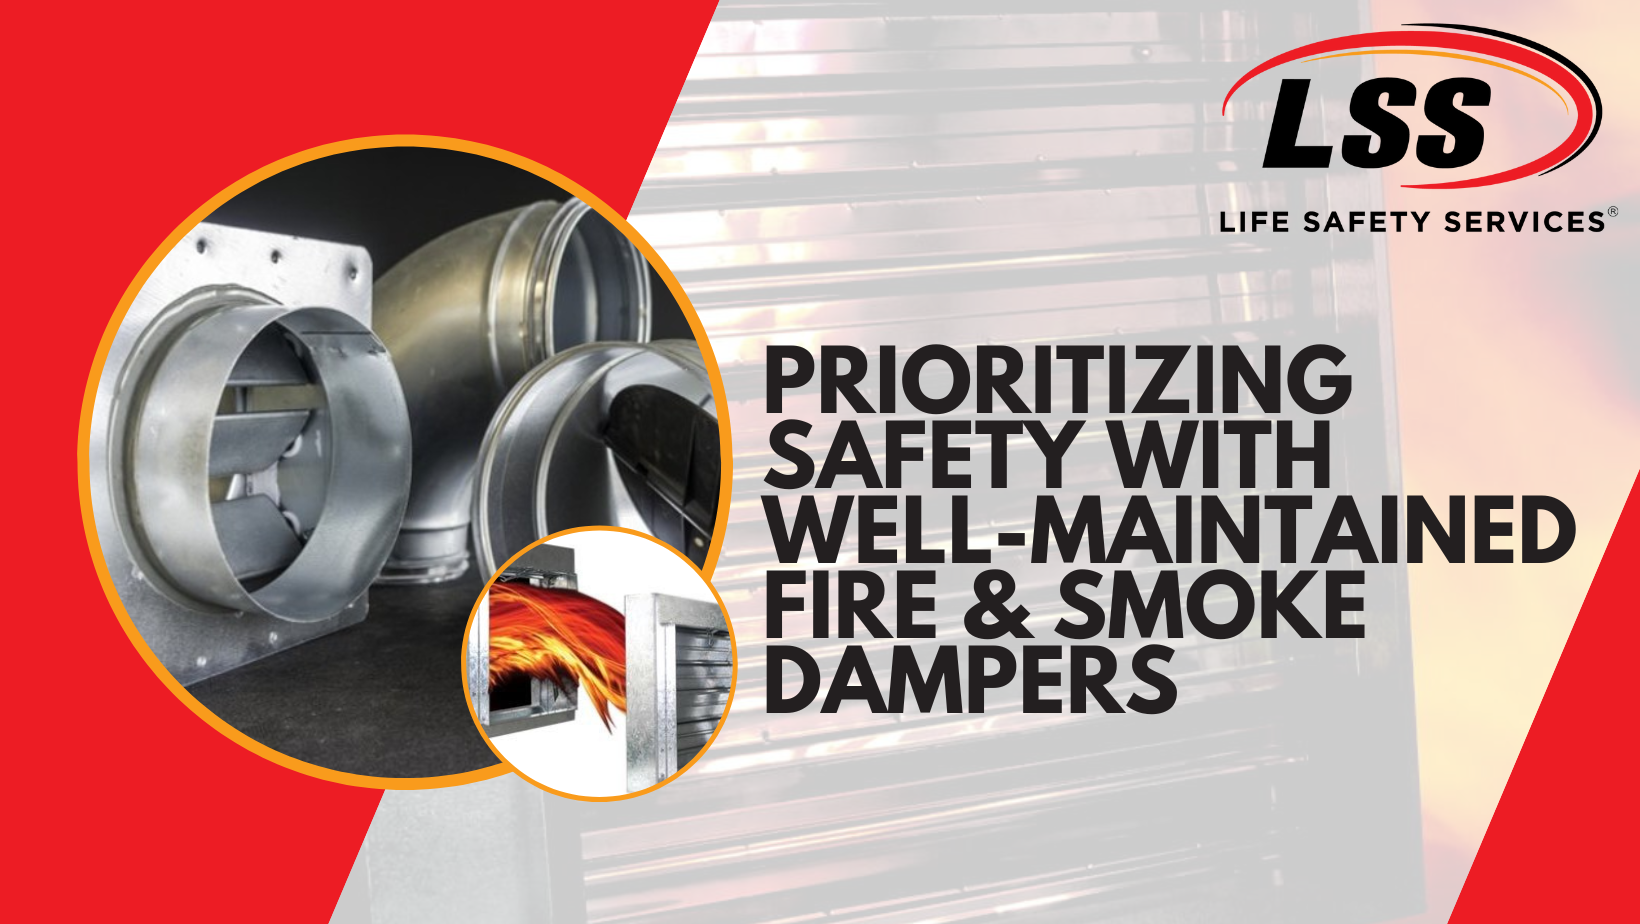 Prioritizing Safety with Well-Maintained Fire & Smoke Dampers